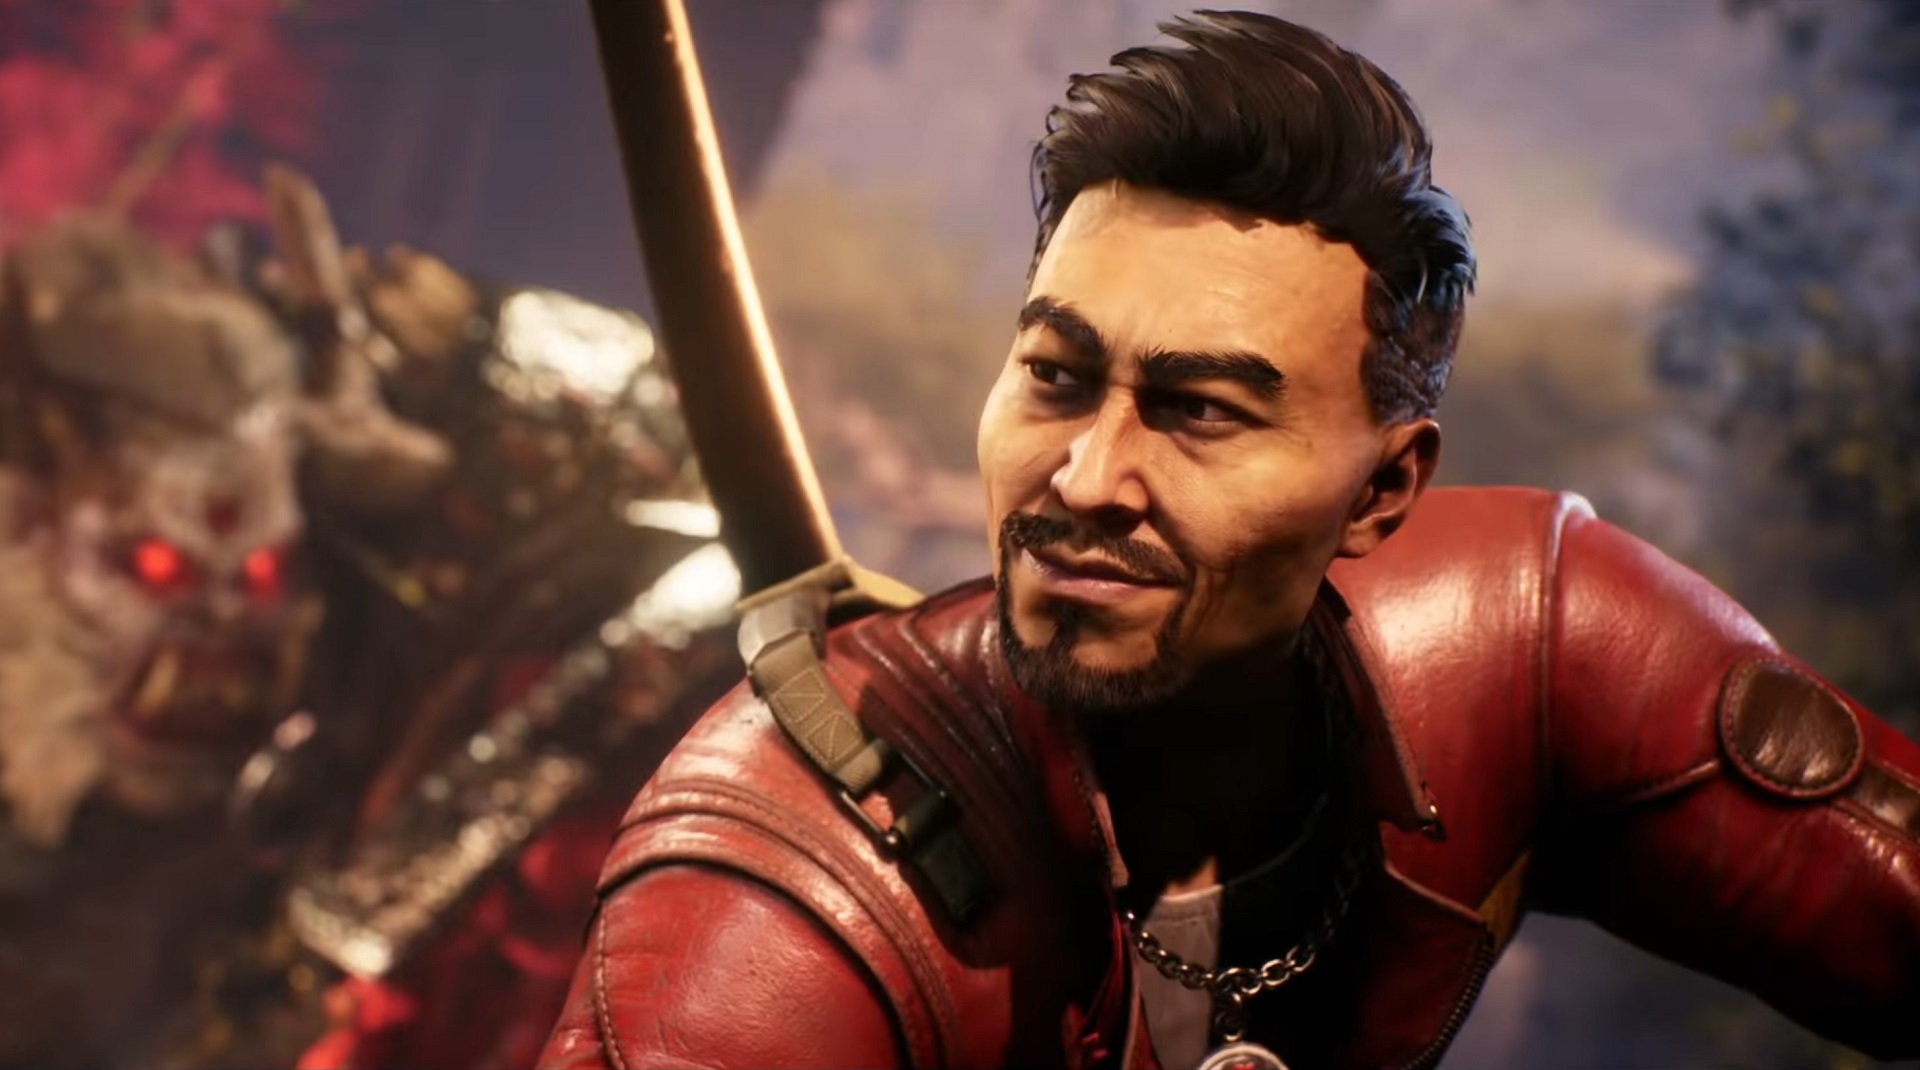 PlayStation Now adds Shadow Warrior 3 and more in March 2022